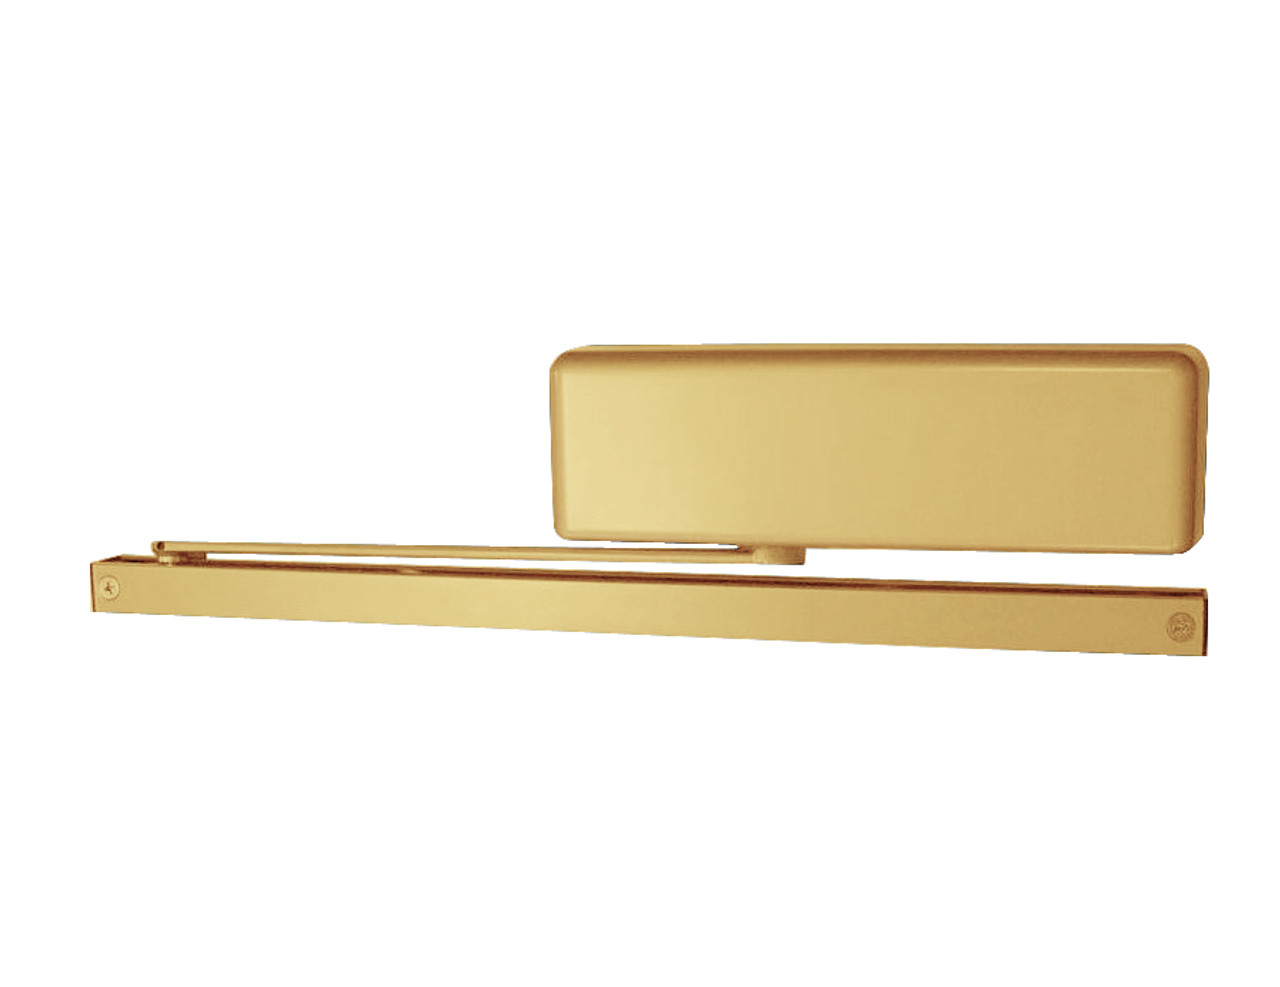 4021T-H-LH-US4 LCN Door Closer with Hold-Open Arm in Satin Brass Finish